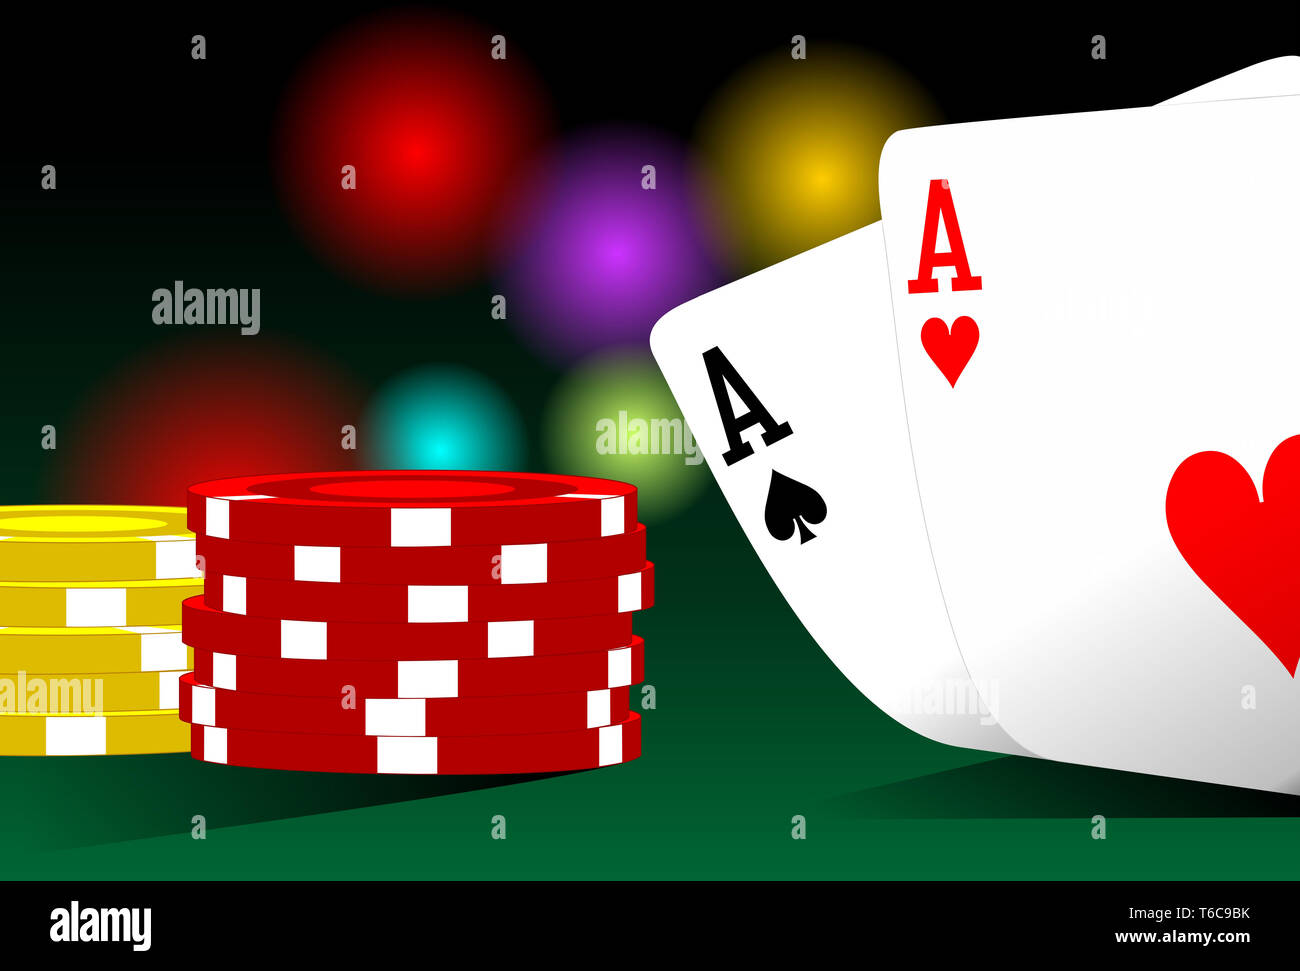 Illustration of pocket aces on a poker table Stock Photo